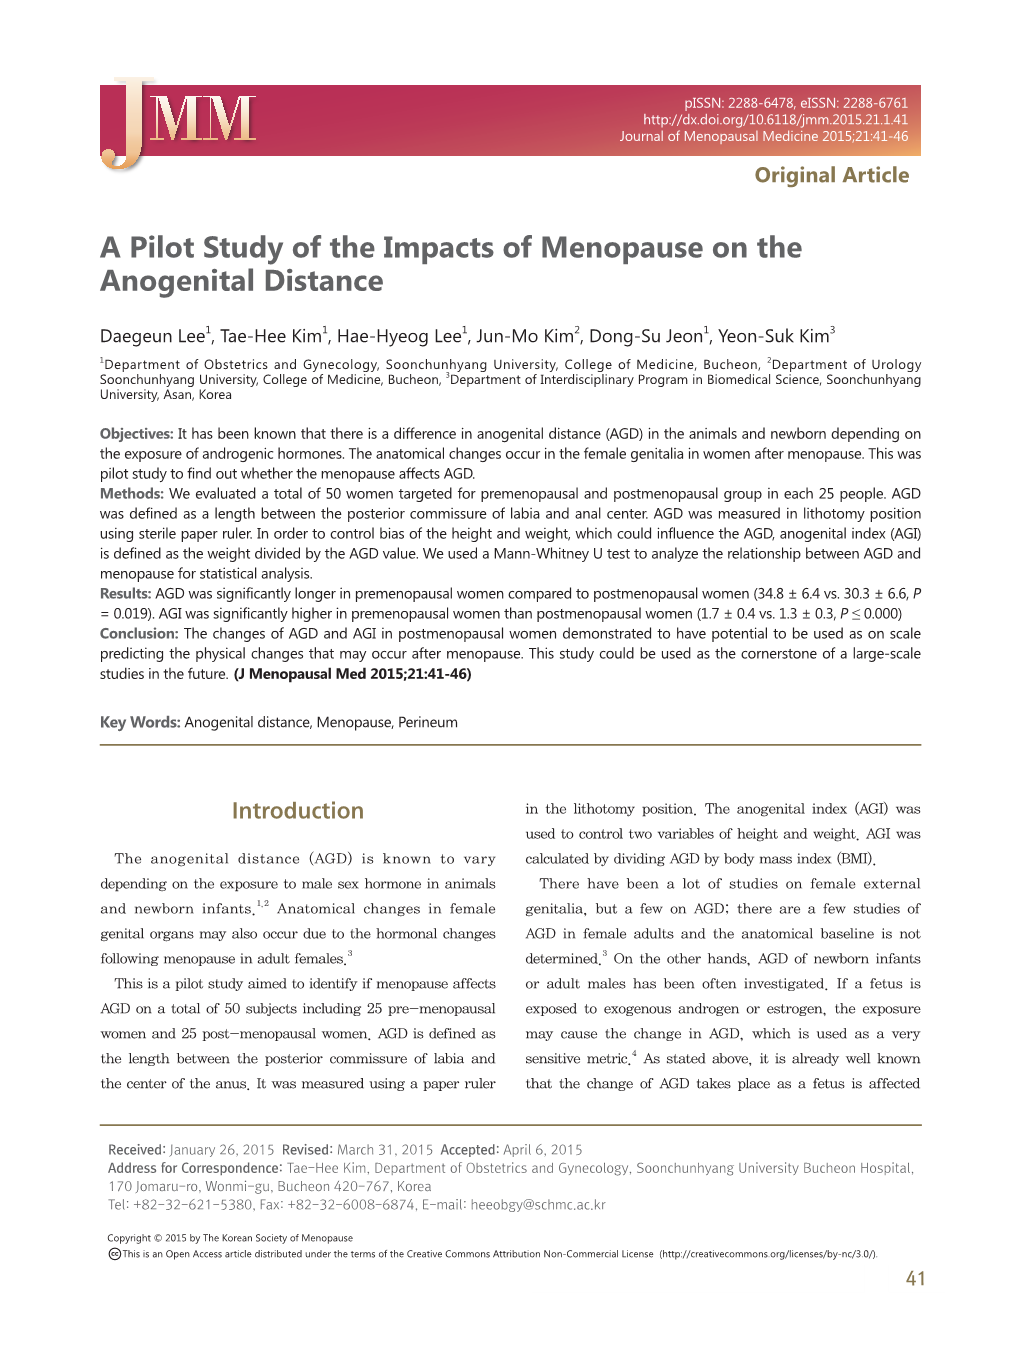 A Pilot Study of the Impacts of Menopause on the Anogenital Distance